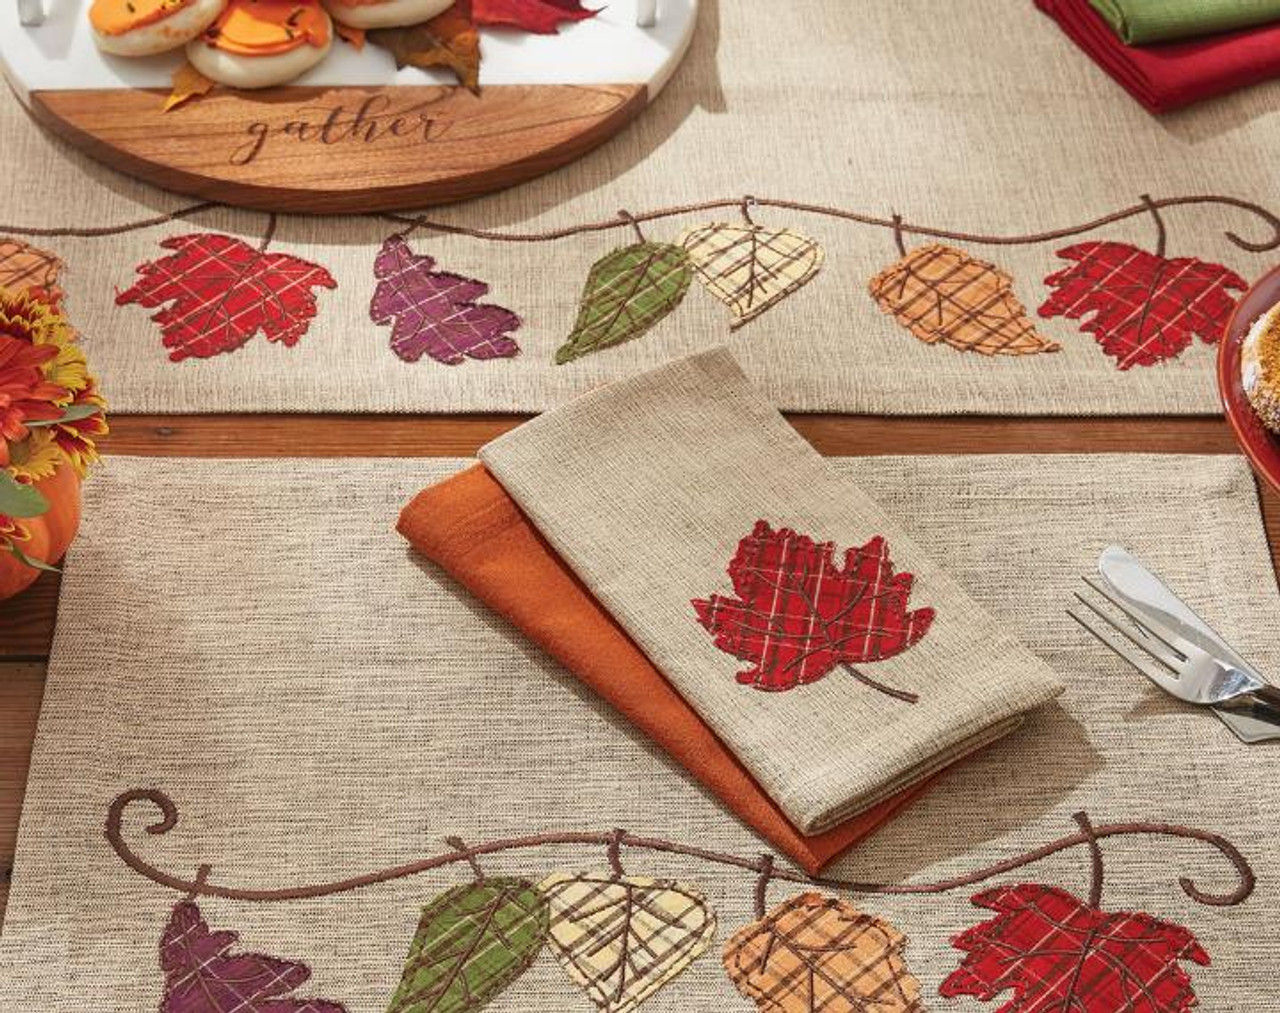 Fall Colors Kitchen & Dining Collection - Country Village Shoppe